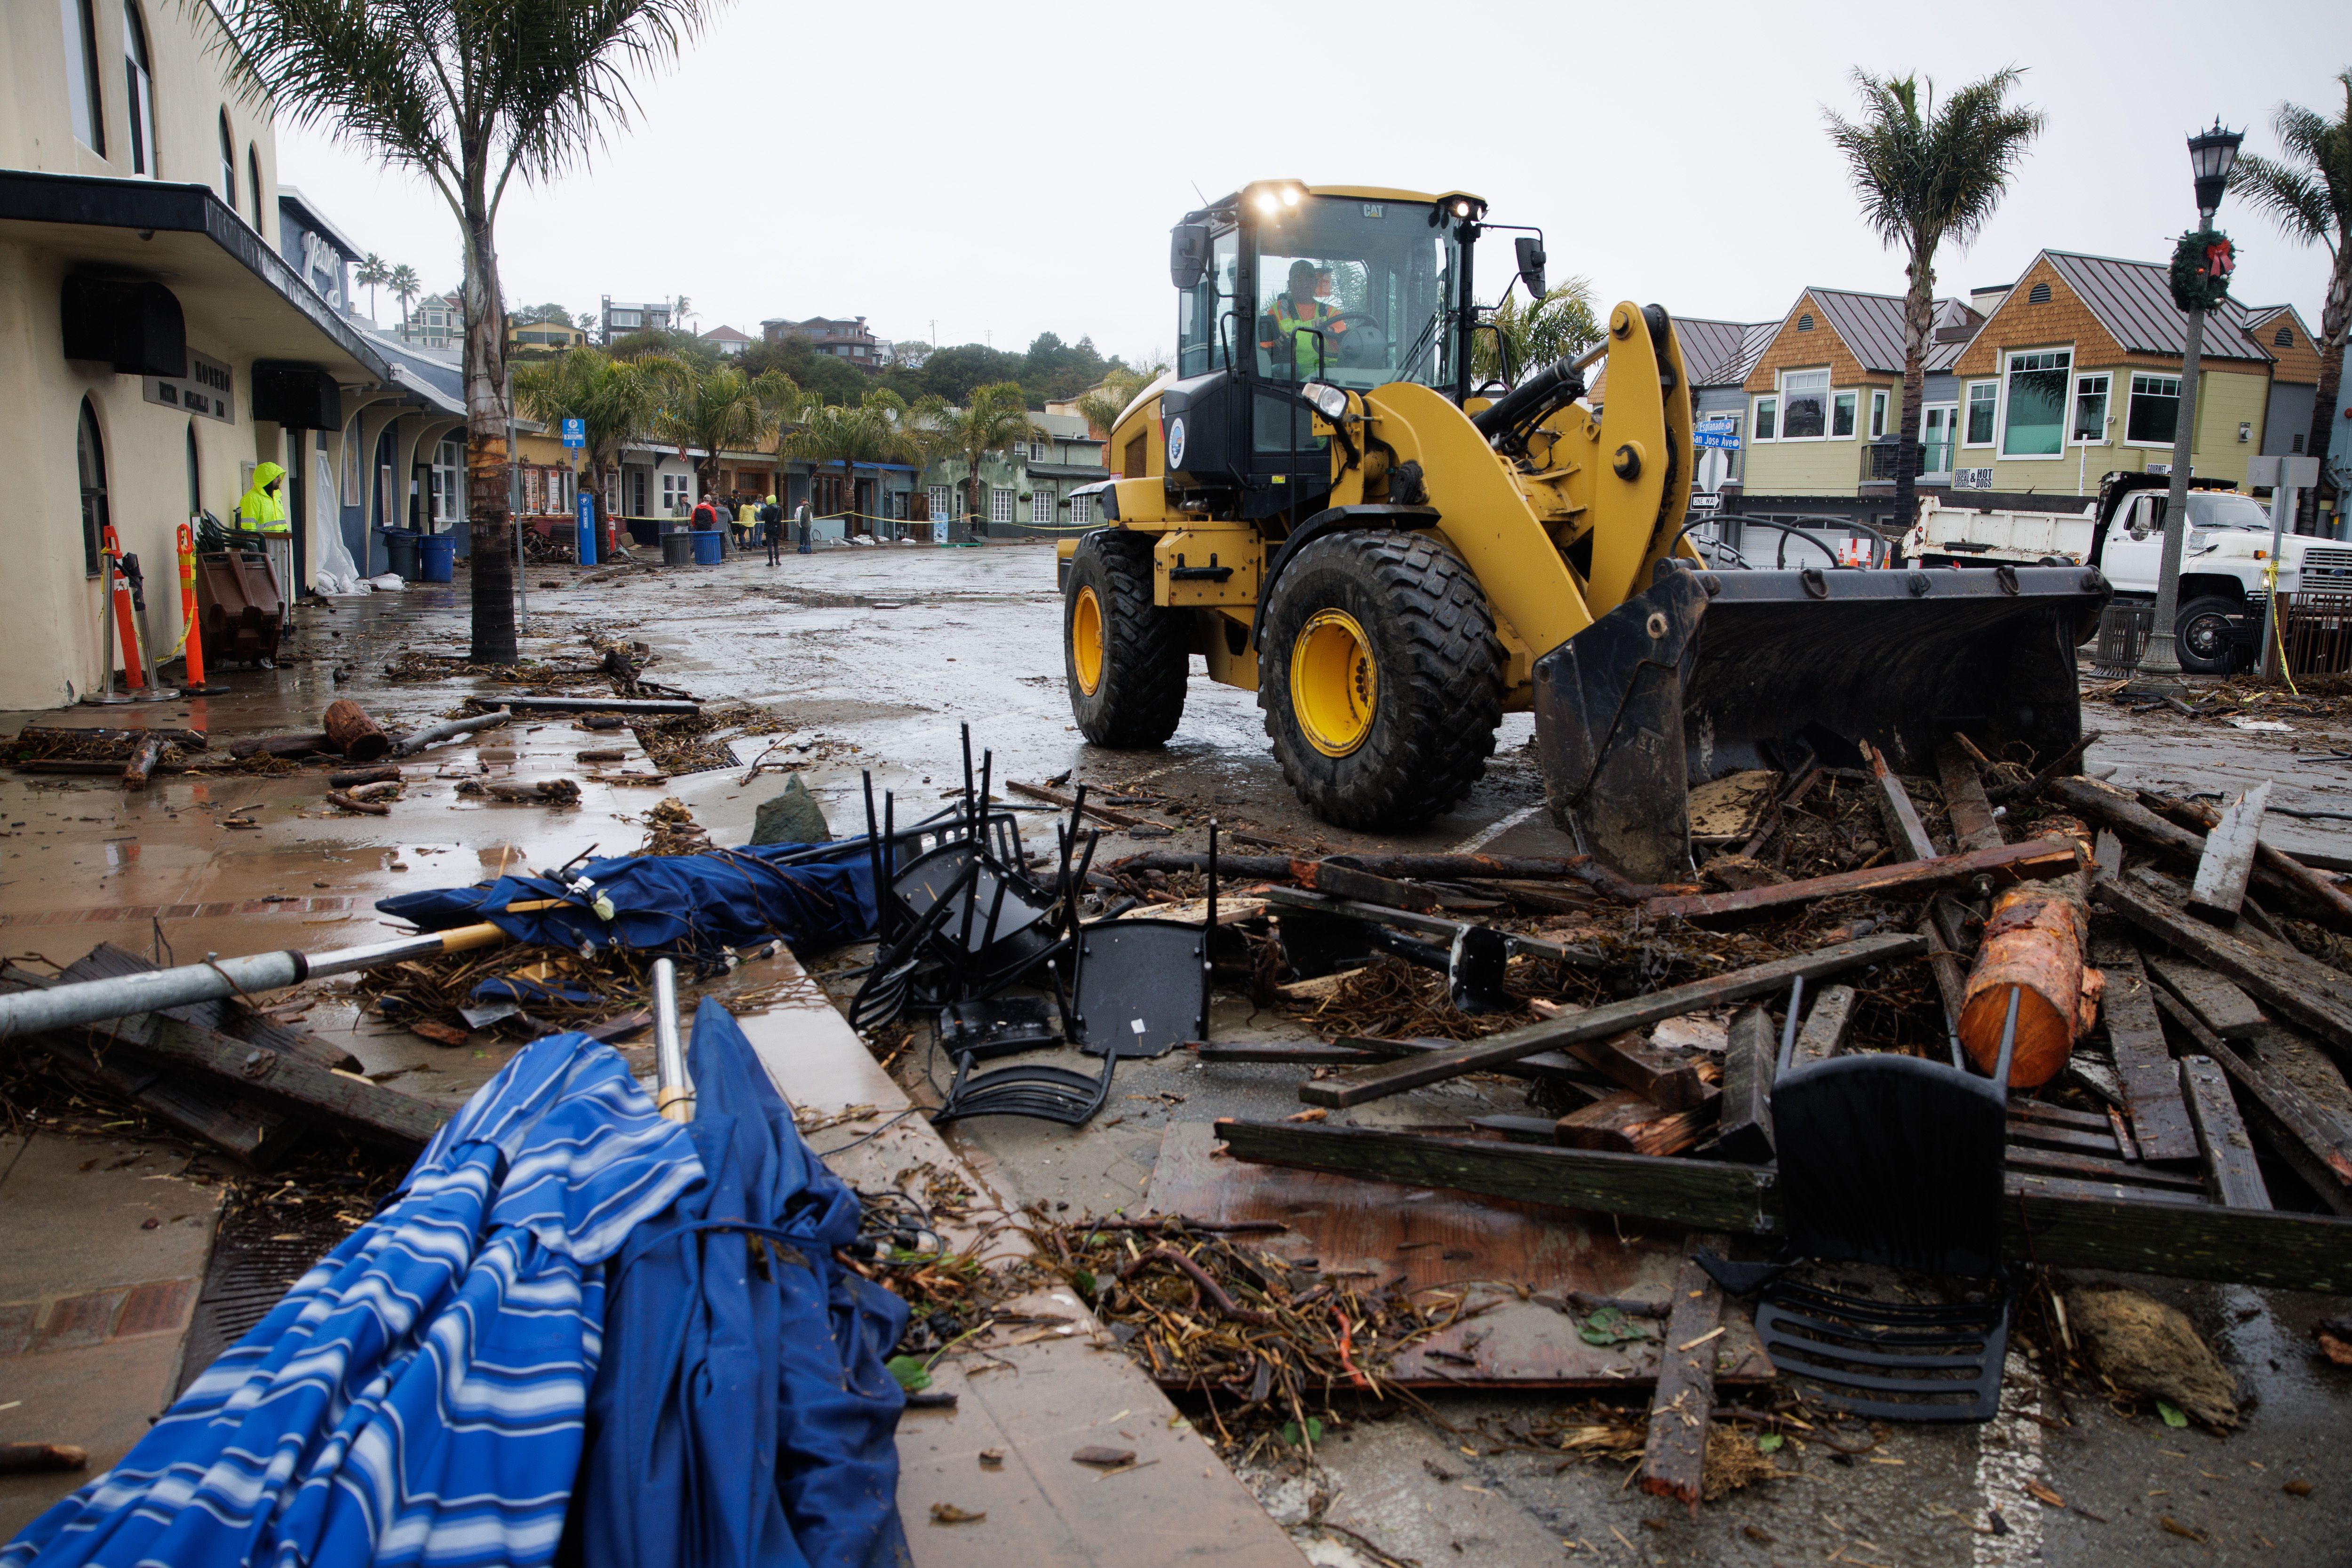 A bulldozerclearing debris from the street at Capitola Village after waves pushed debris down the street damaging bars and restaurants along Esplanade in Capitola, Calif., on Thursday, Jan. 5.